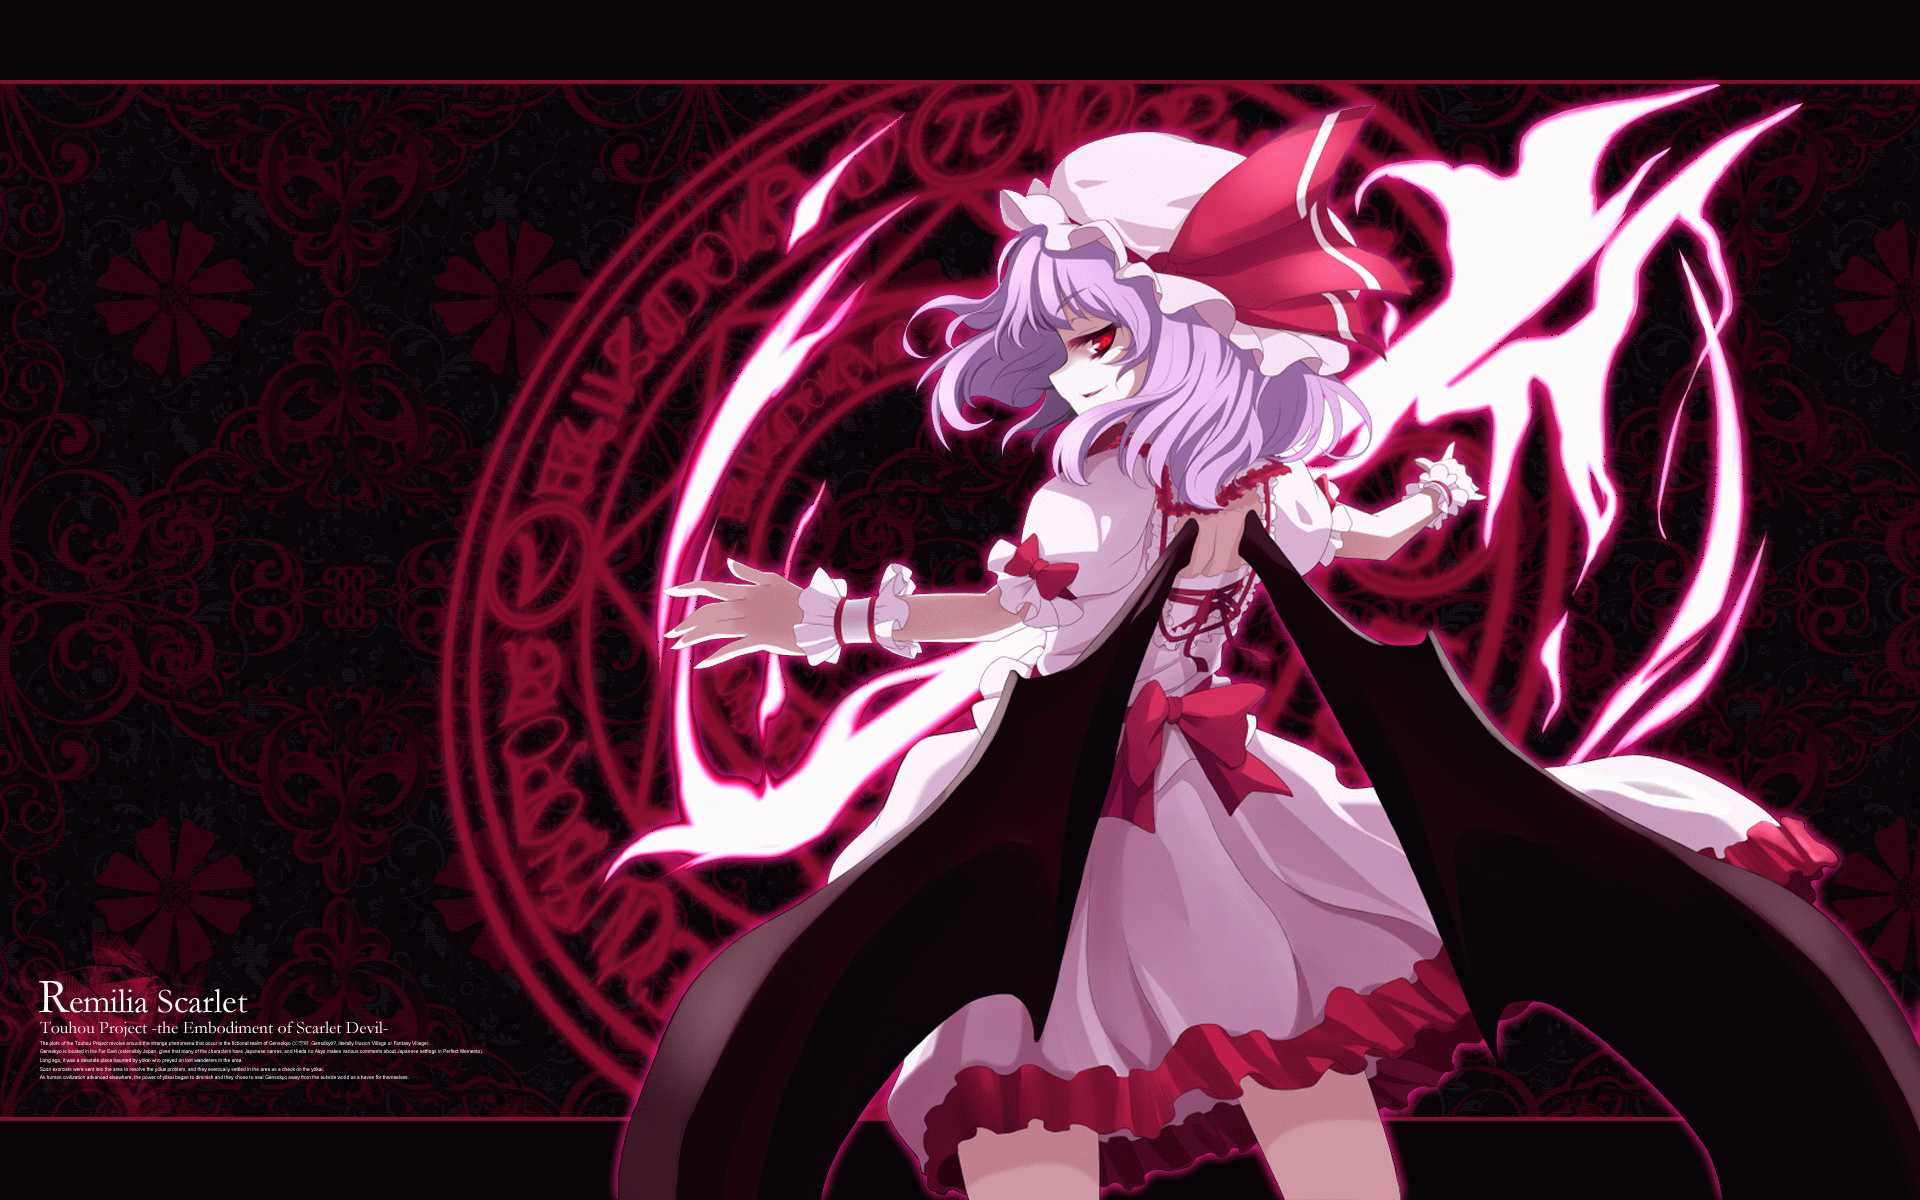 Free Download Touhou Animated Wallpaper 19x10 Touhou Animated Vampires 19x10 For Your Desktop Mobile Tablet Explore 49 Make A Gif Wallpaper Make Gif Wallpaper Mac Making A Gif Your